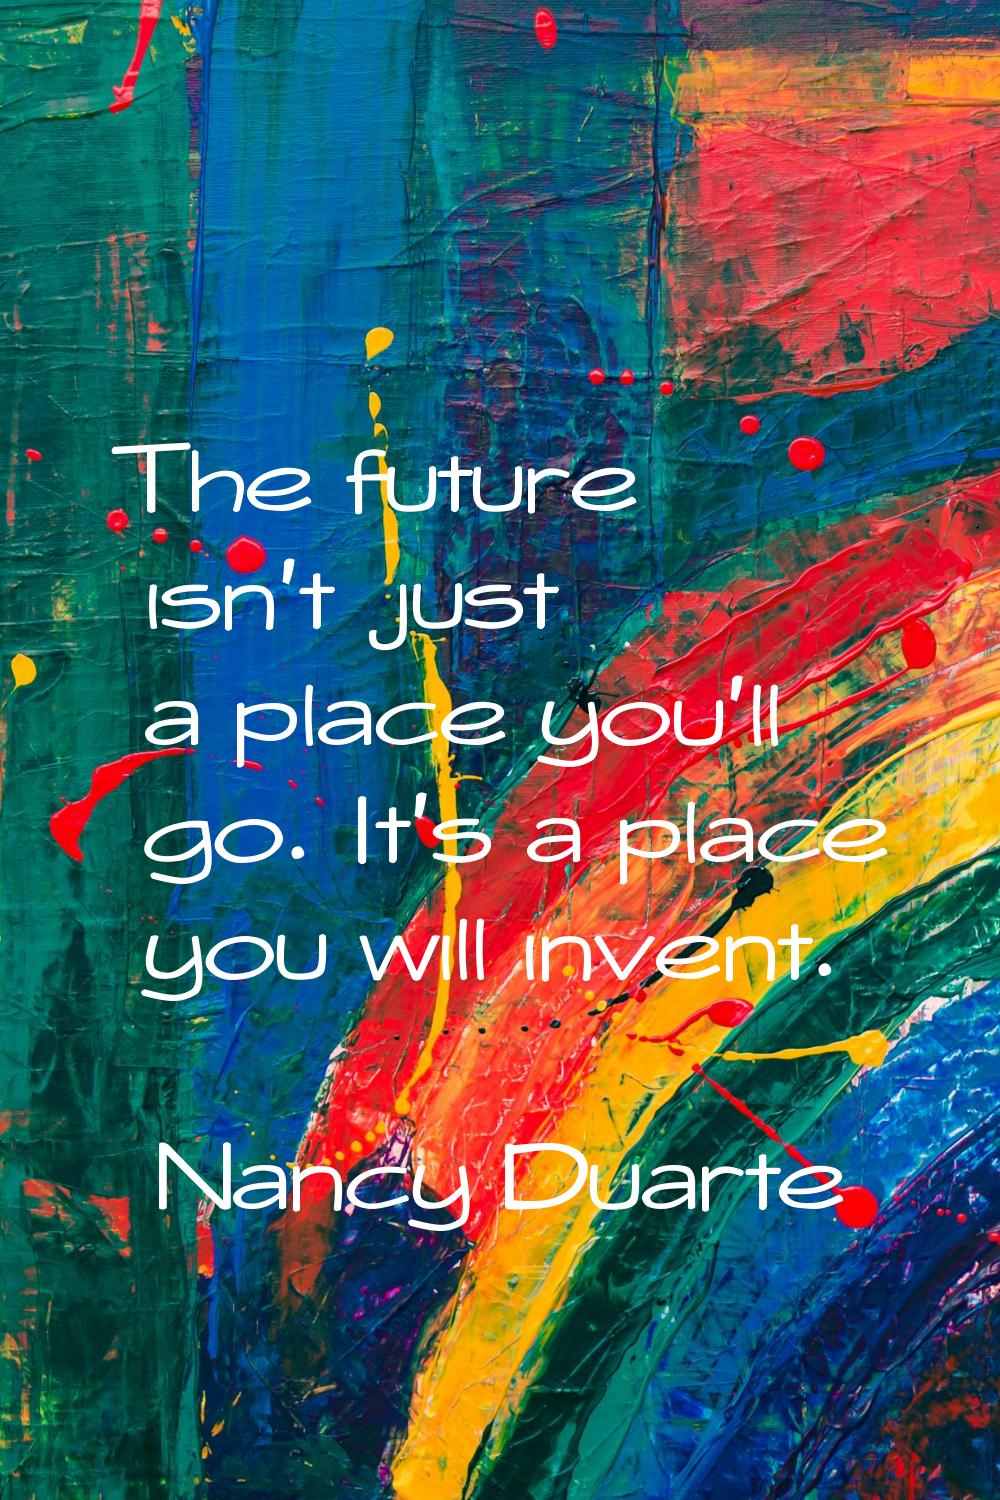 The future isn't just a place you'll go. It's a place you will invent.